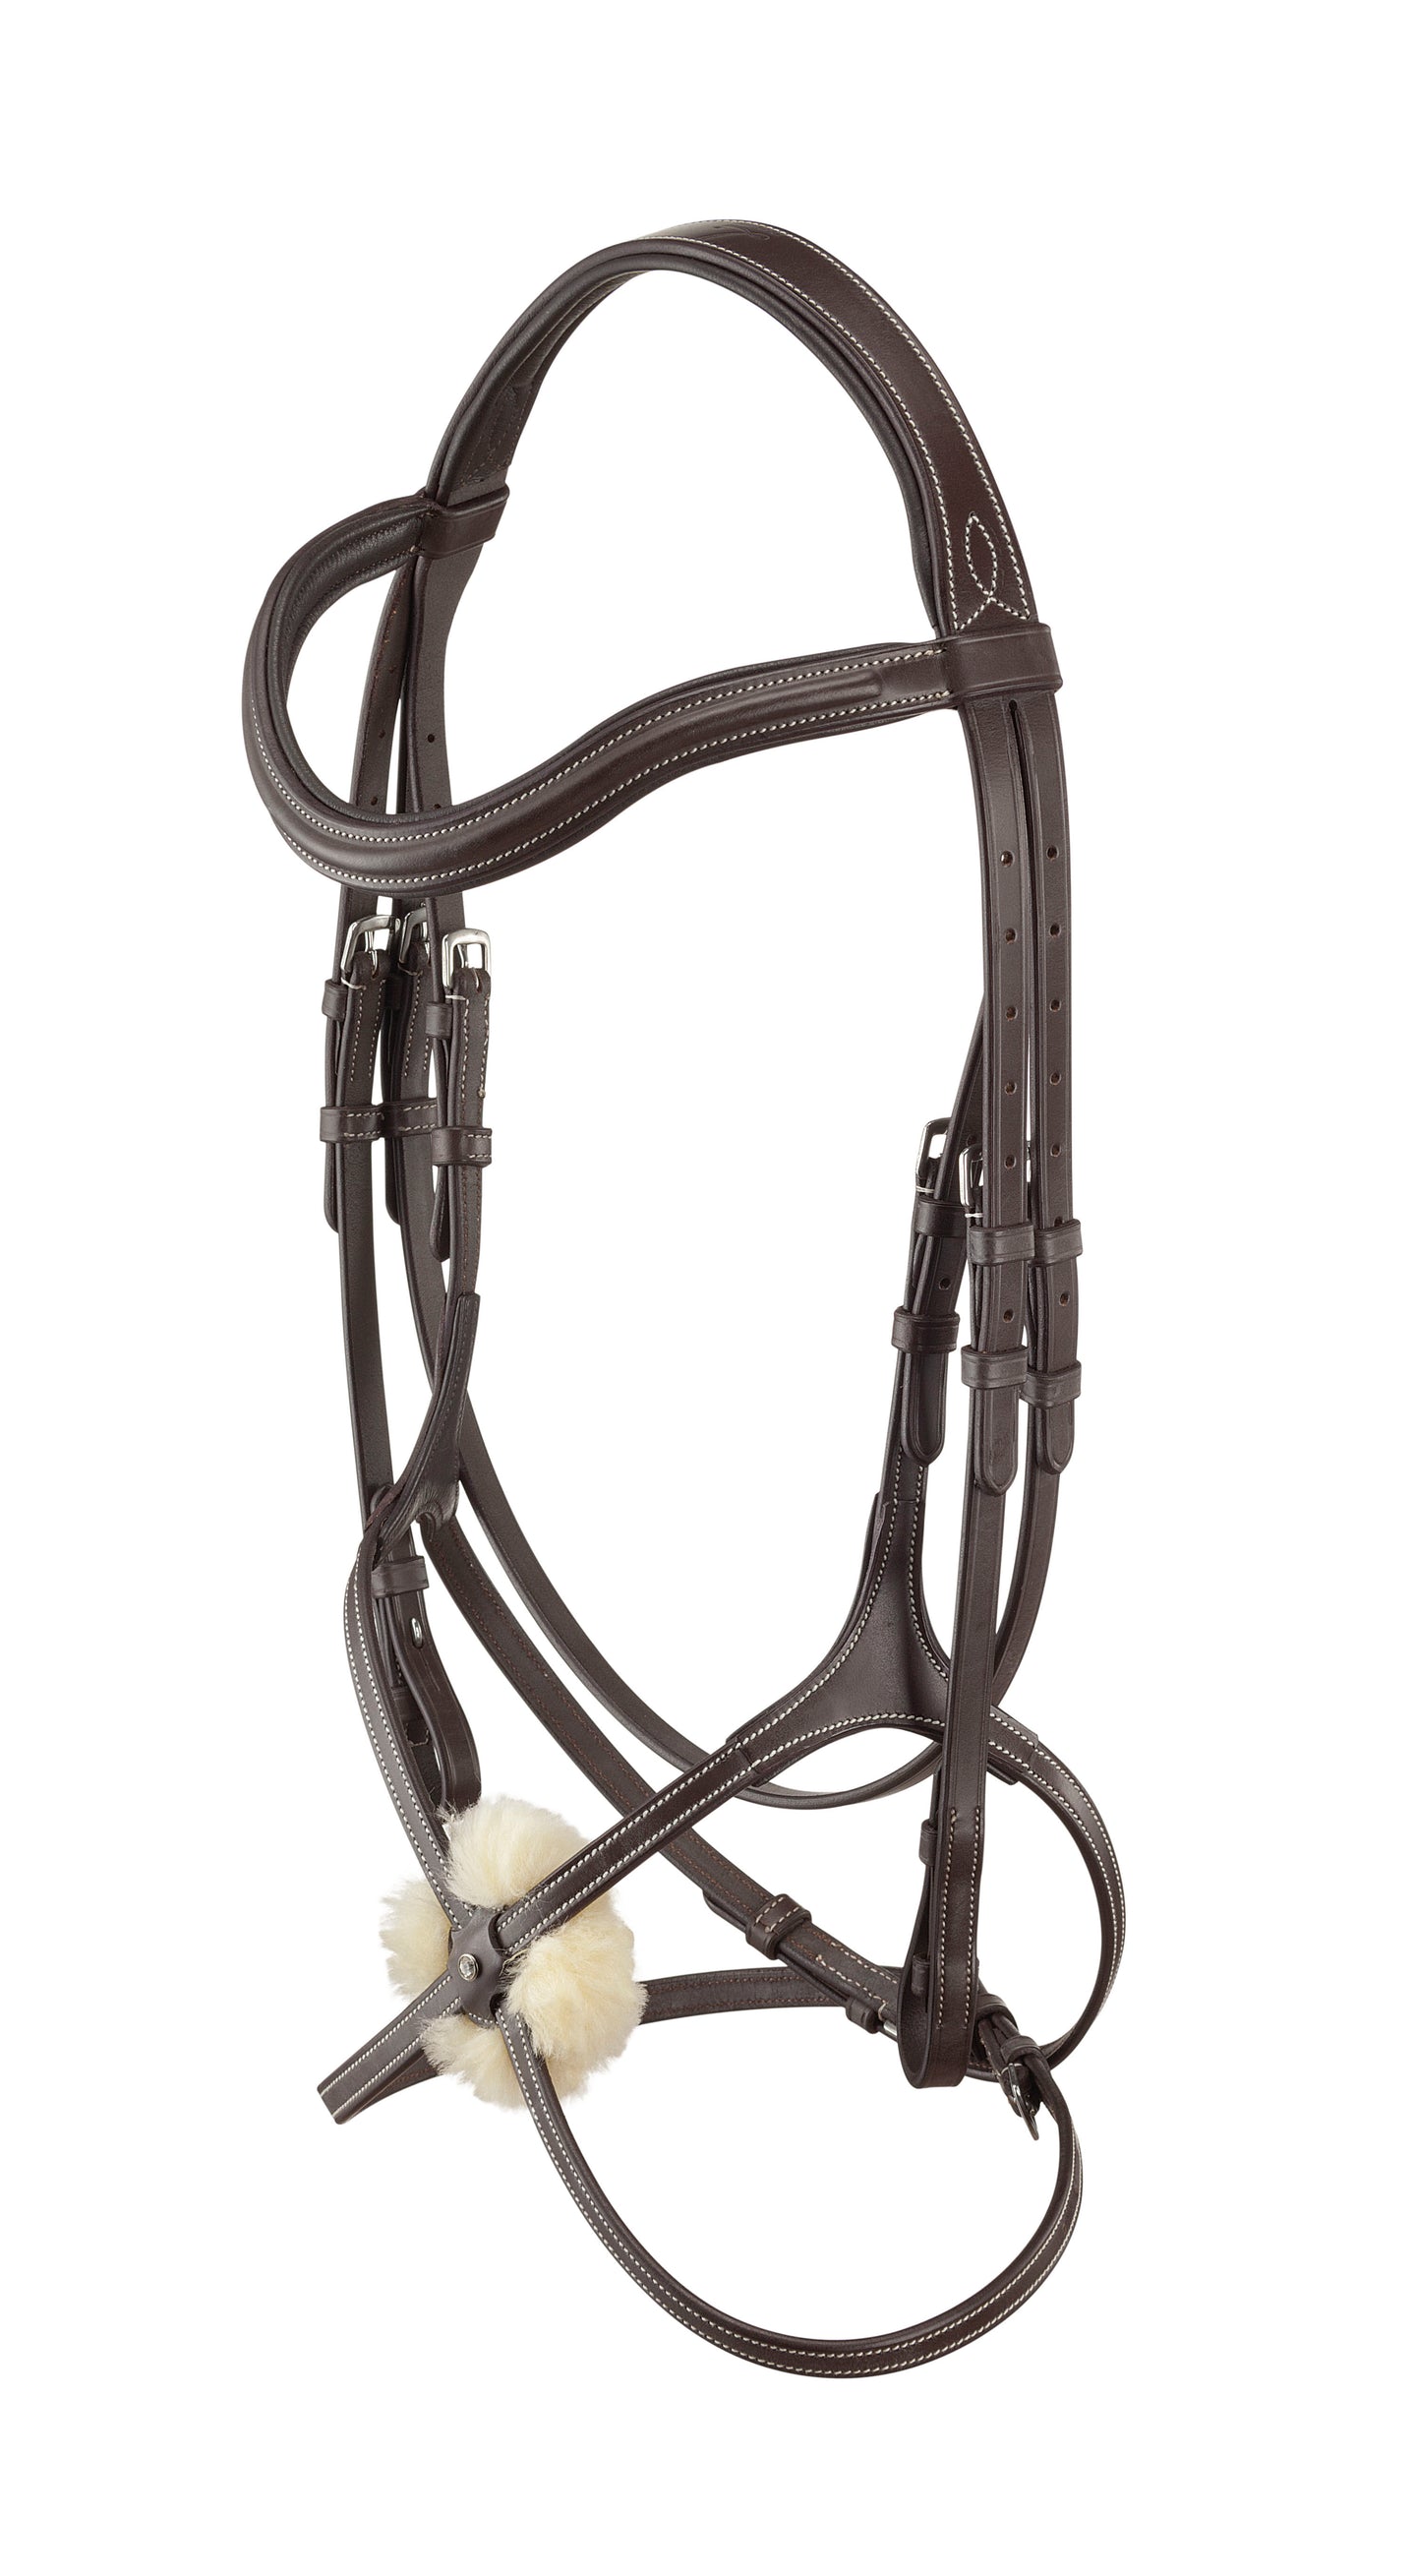 Complete bridle with reins, English leather